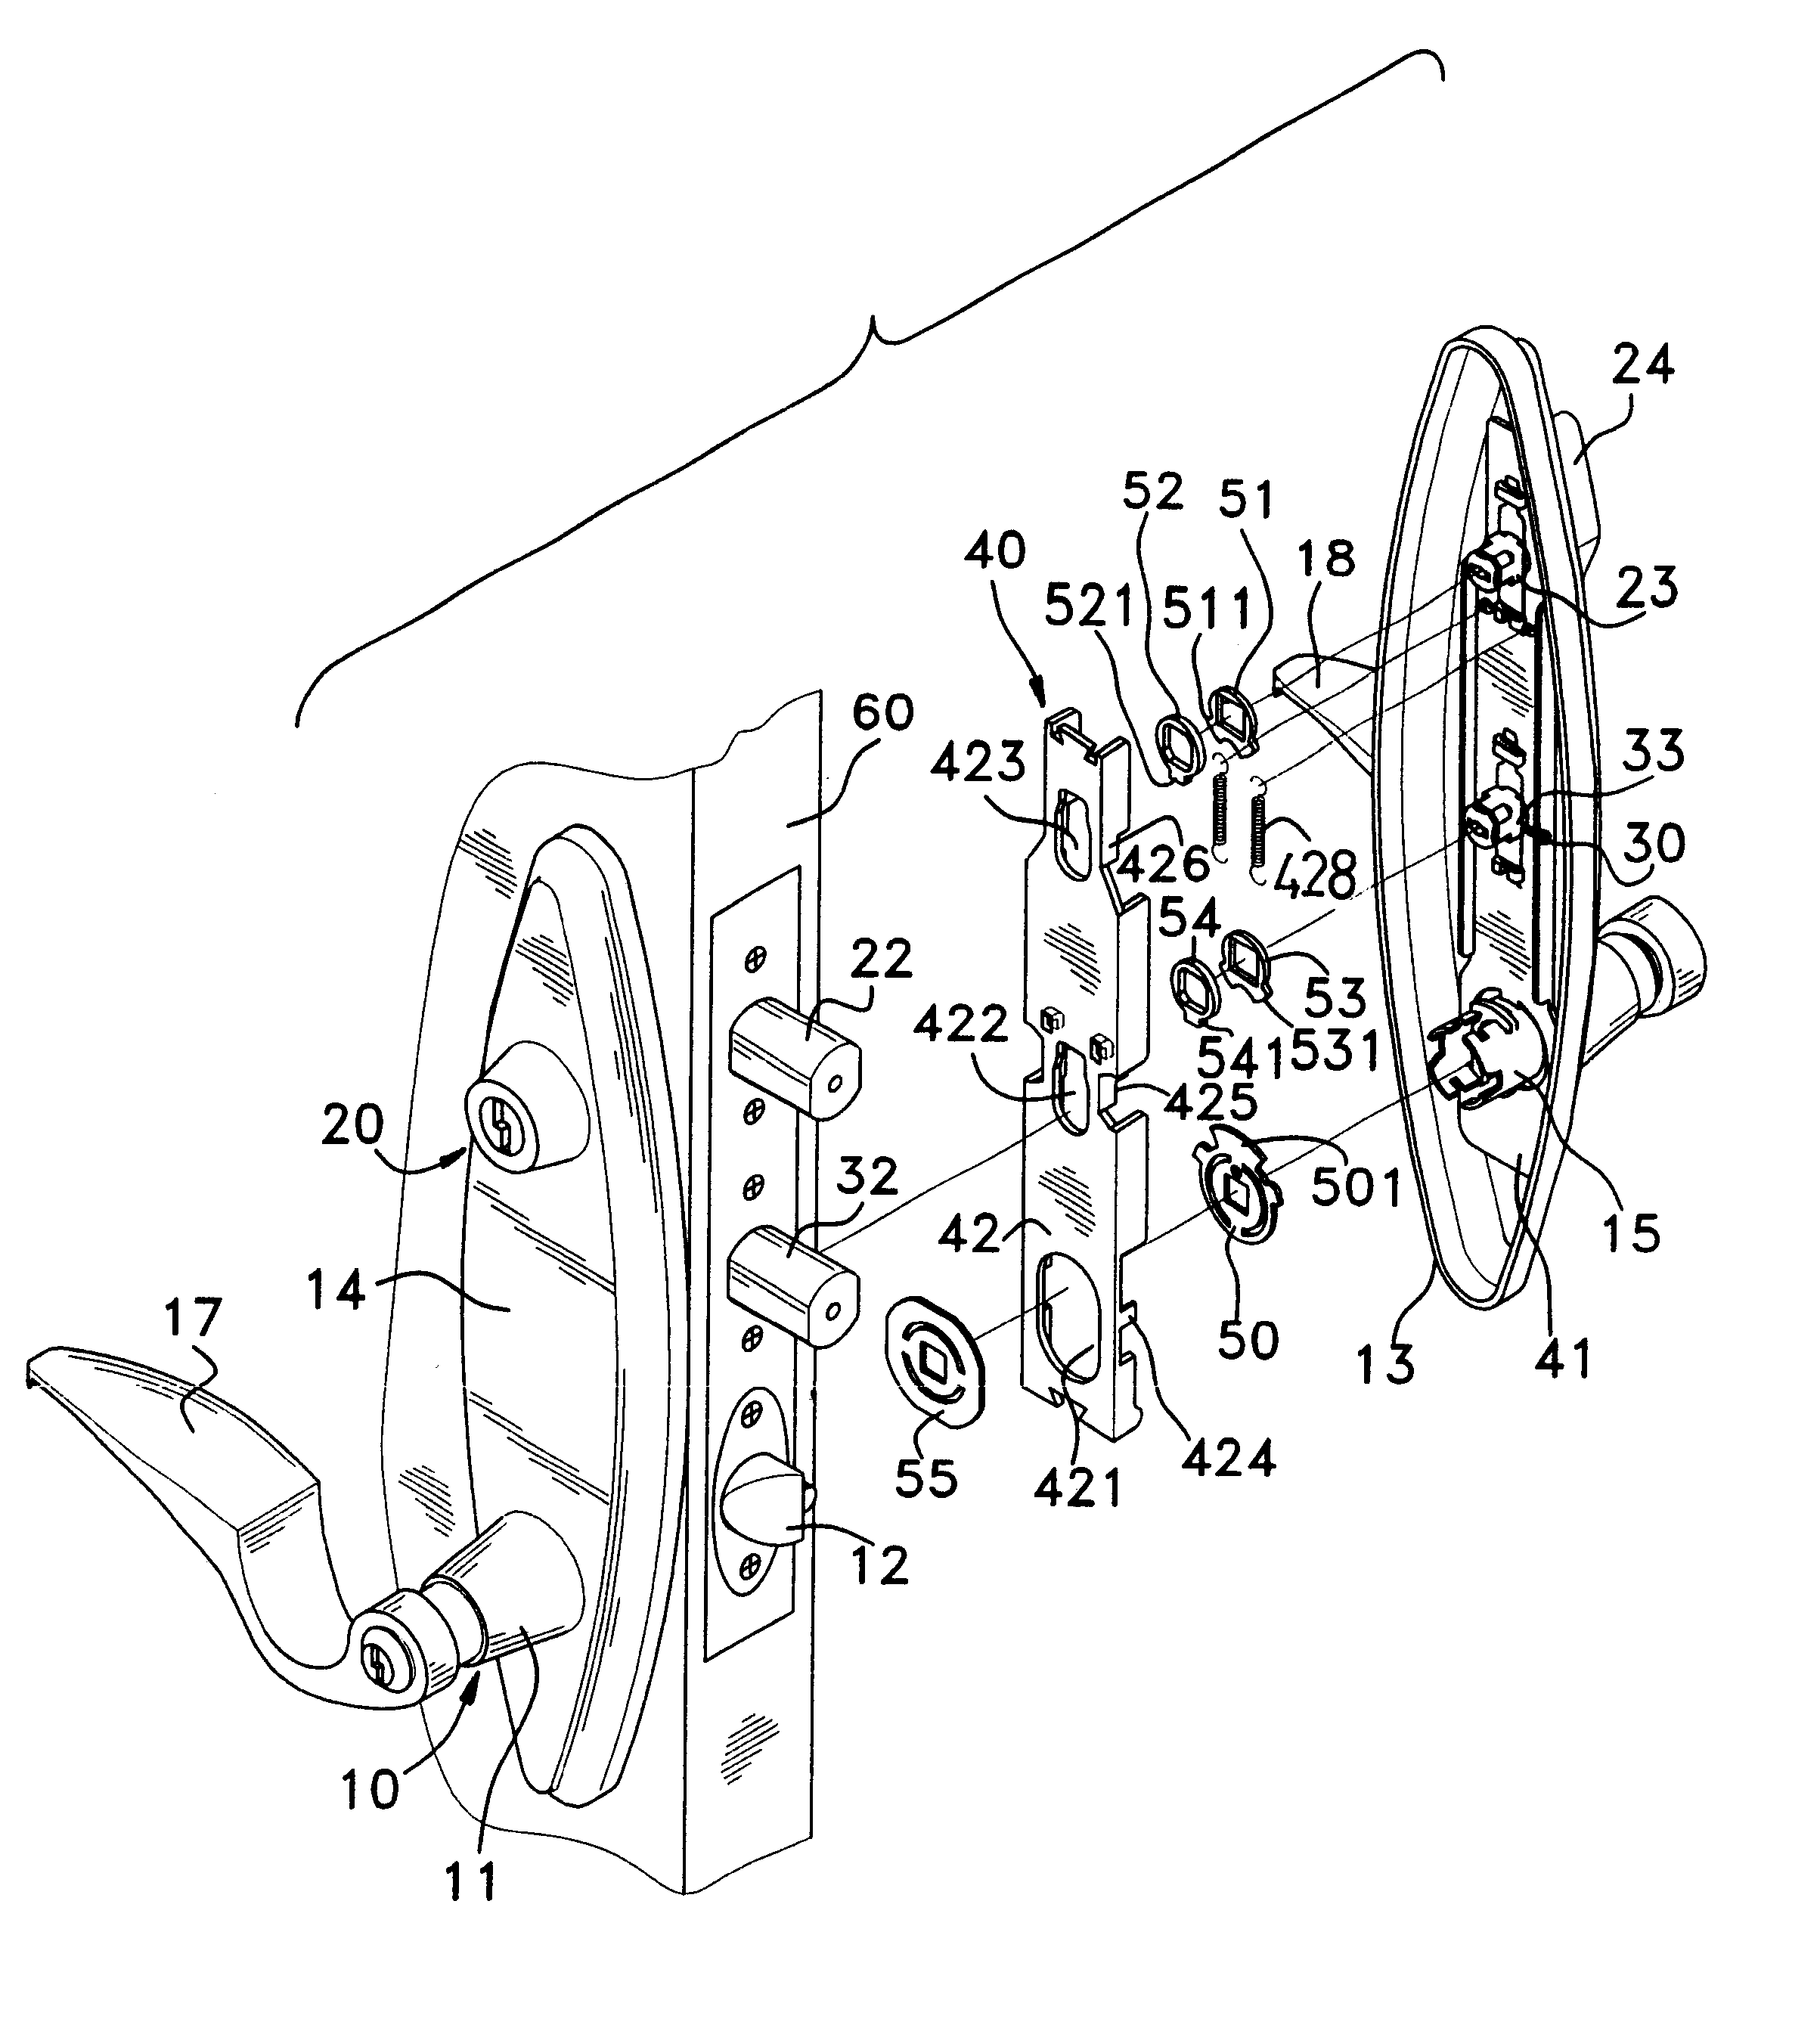 Door lock assembly with multiple latch devices